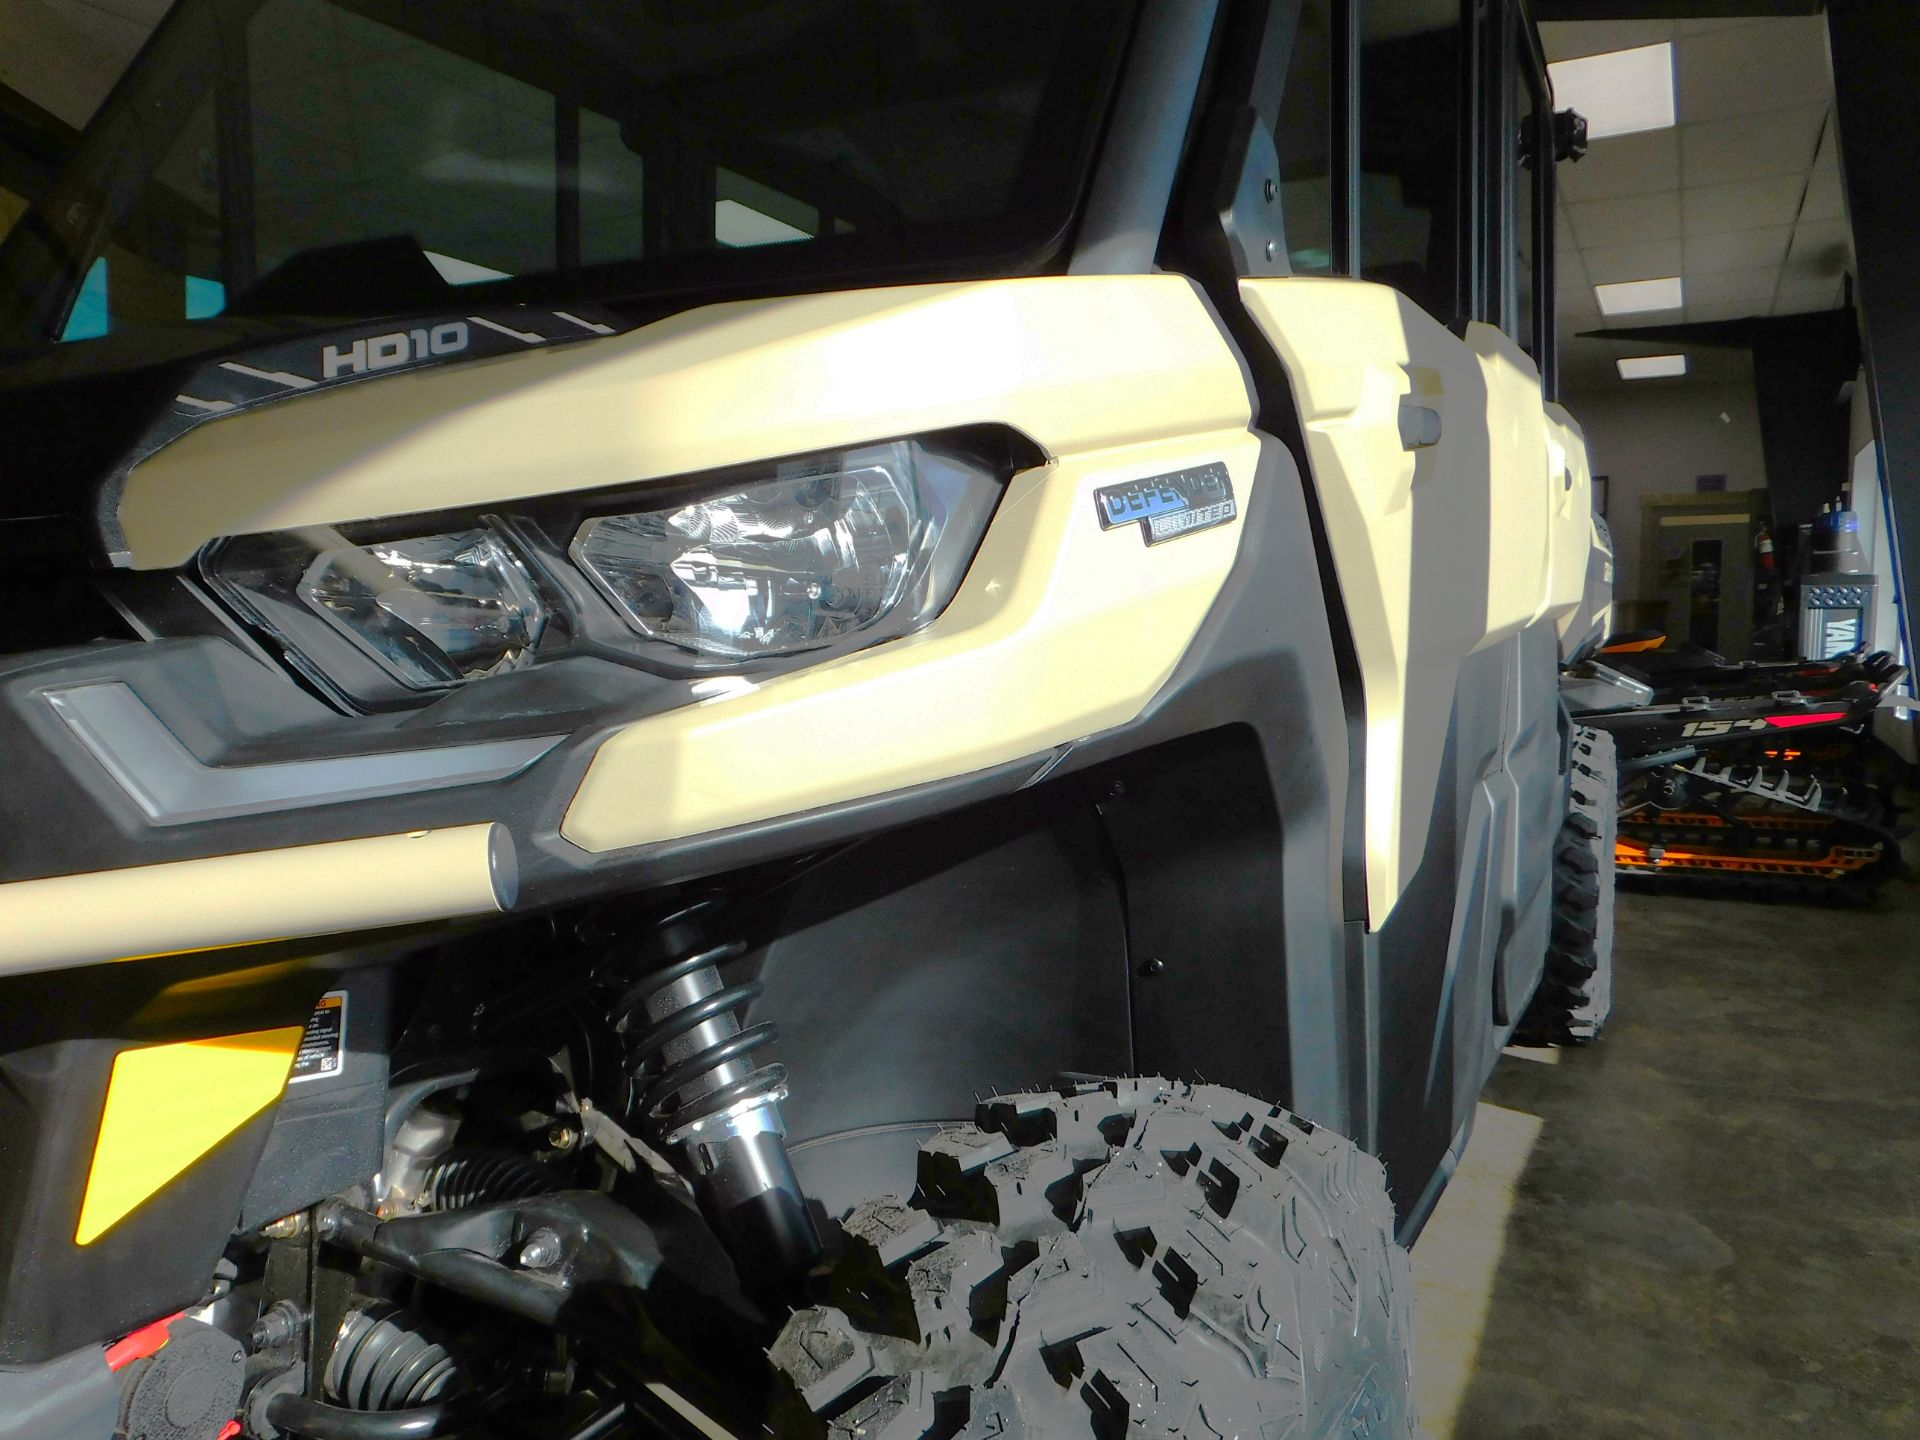 2024 Can-Am Defender MAX Limited HD10 in Laramie, Wyoming - Photo 7